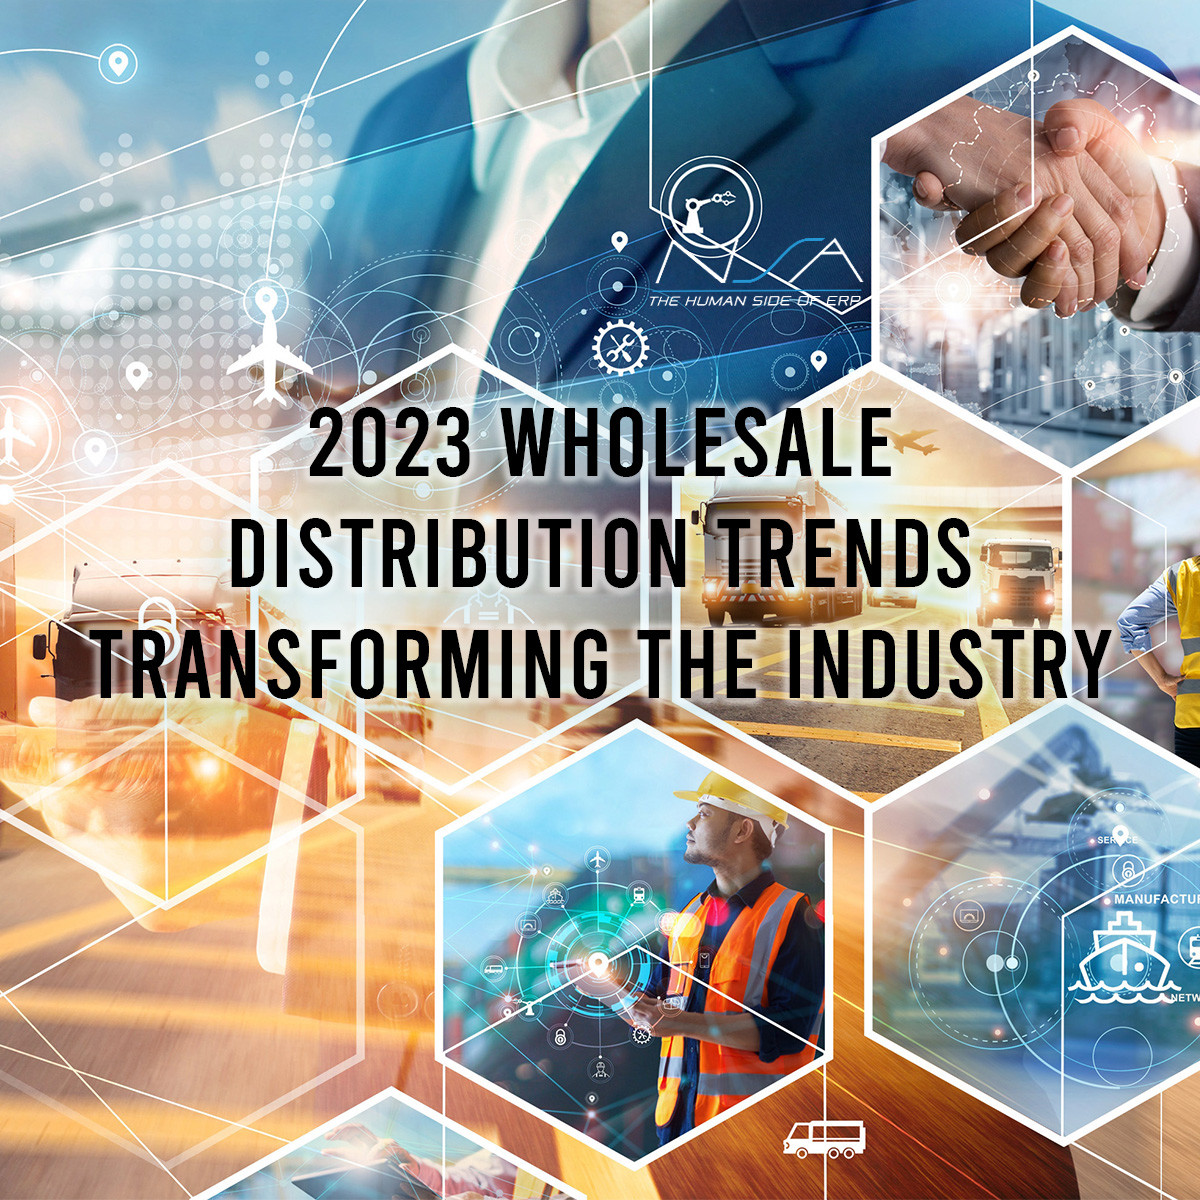 We explore the primary trends in #WholesaleDistribution this year. From real-time supply chain visibility to keeping up with rapid technology evolution and more…keep reading for the latest #DistributionIndustry news! rpb.li/TPg1u

#NSAComputerExchange